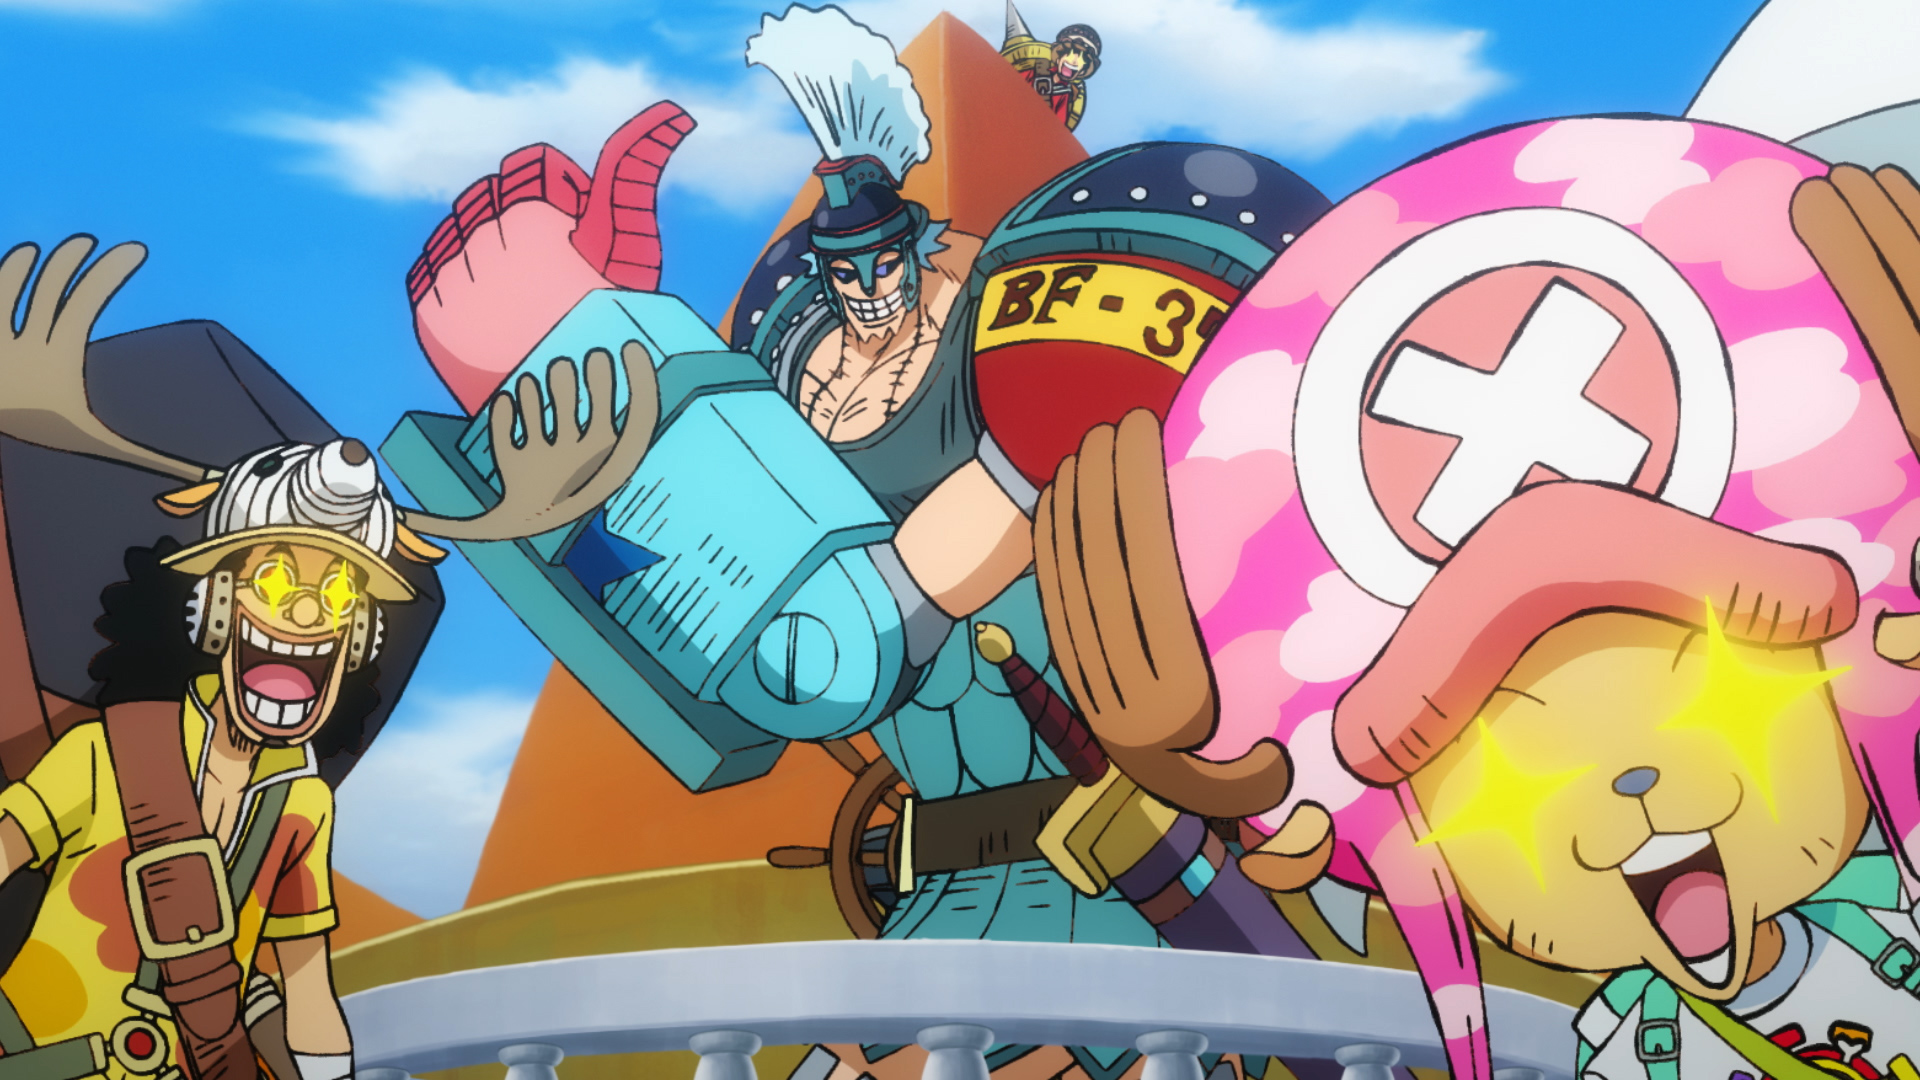 Toei Animation Set Sail One Piece Stampede Is Now Available To Own In Sub Or Dub On Itunes T Co Ngulkgayfv Twitter